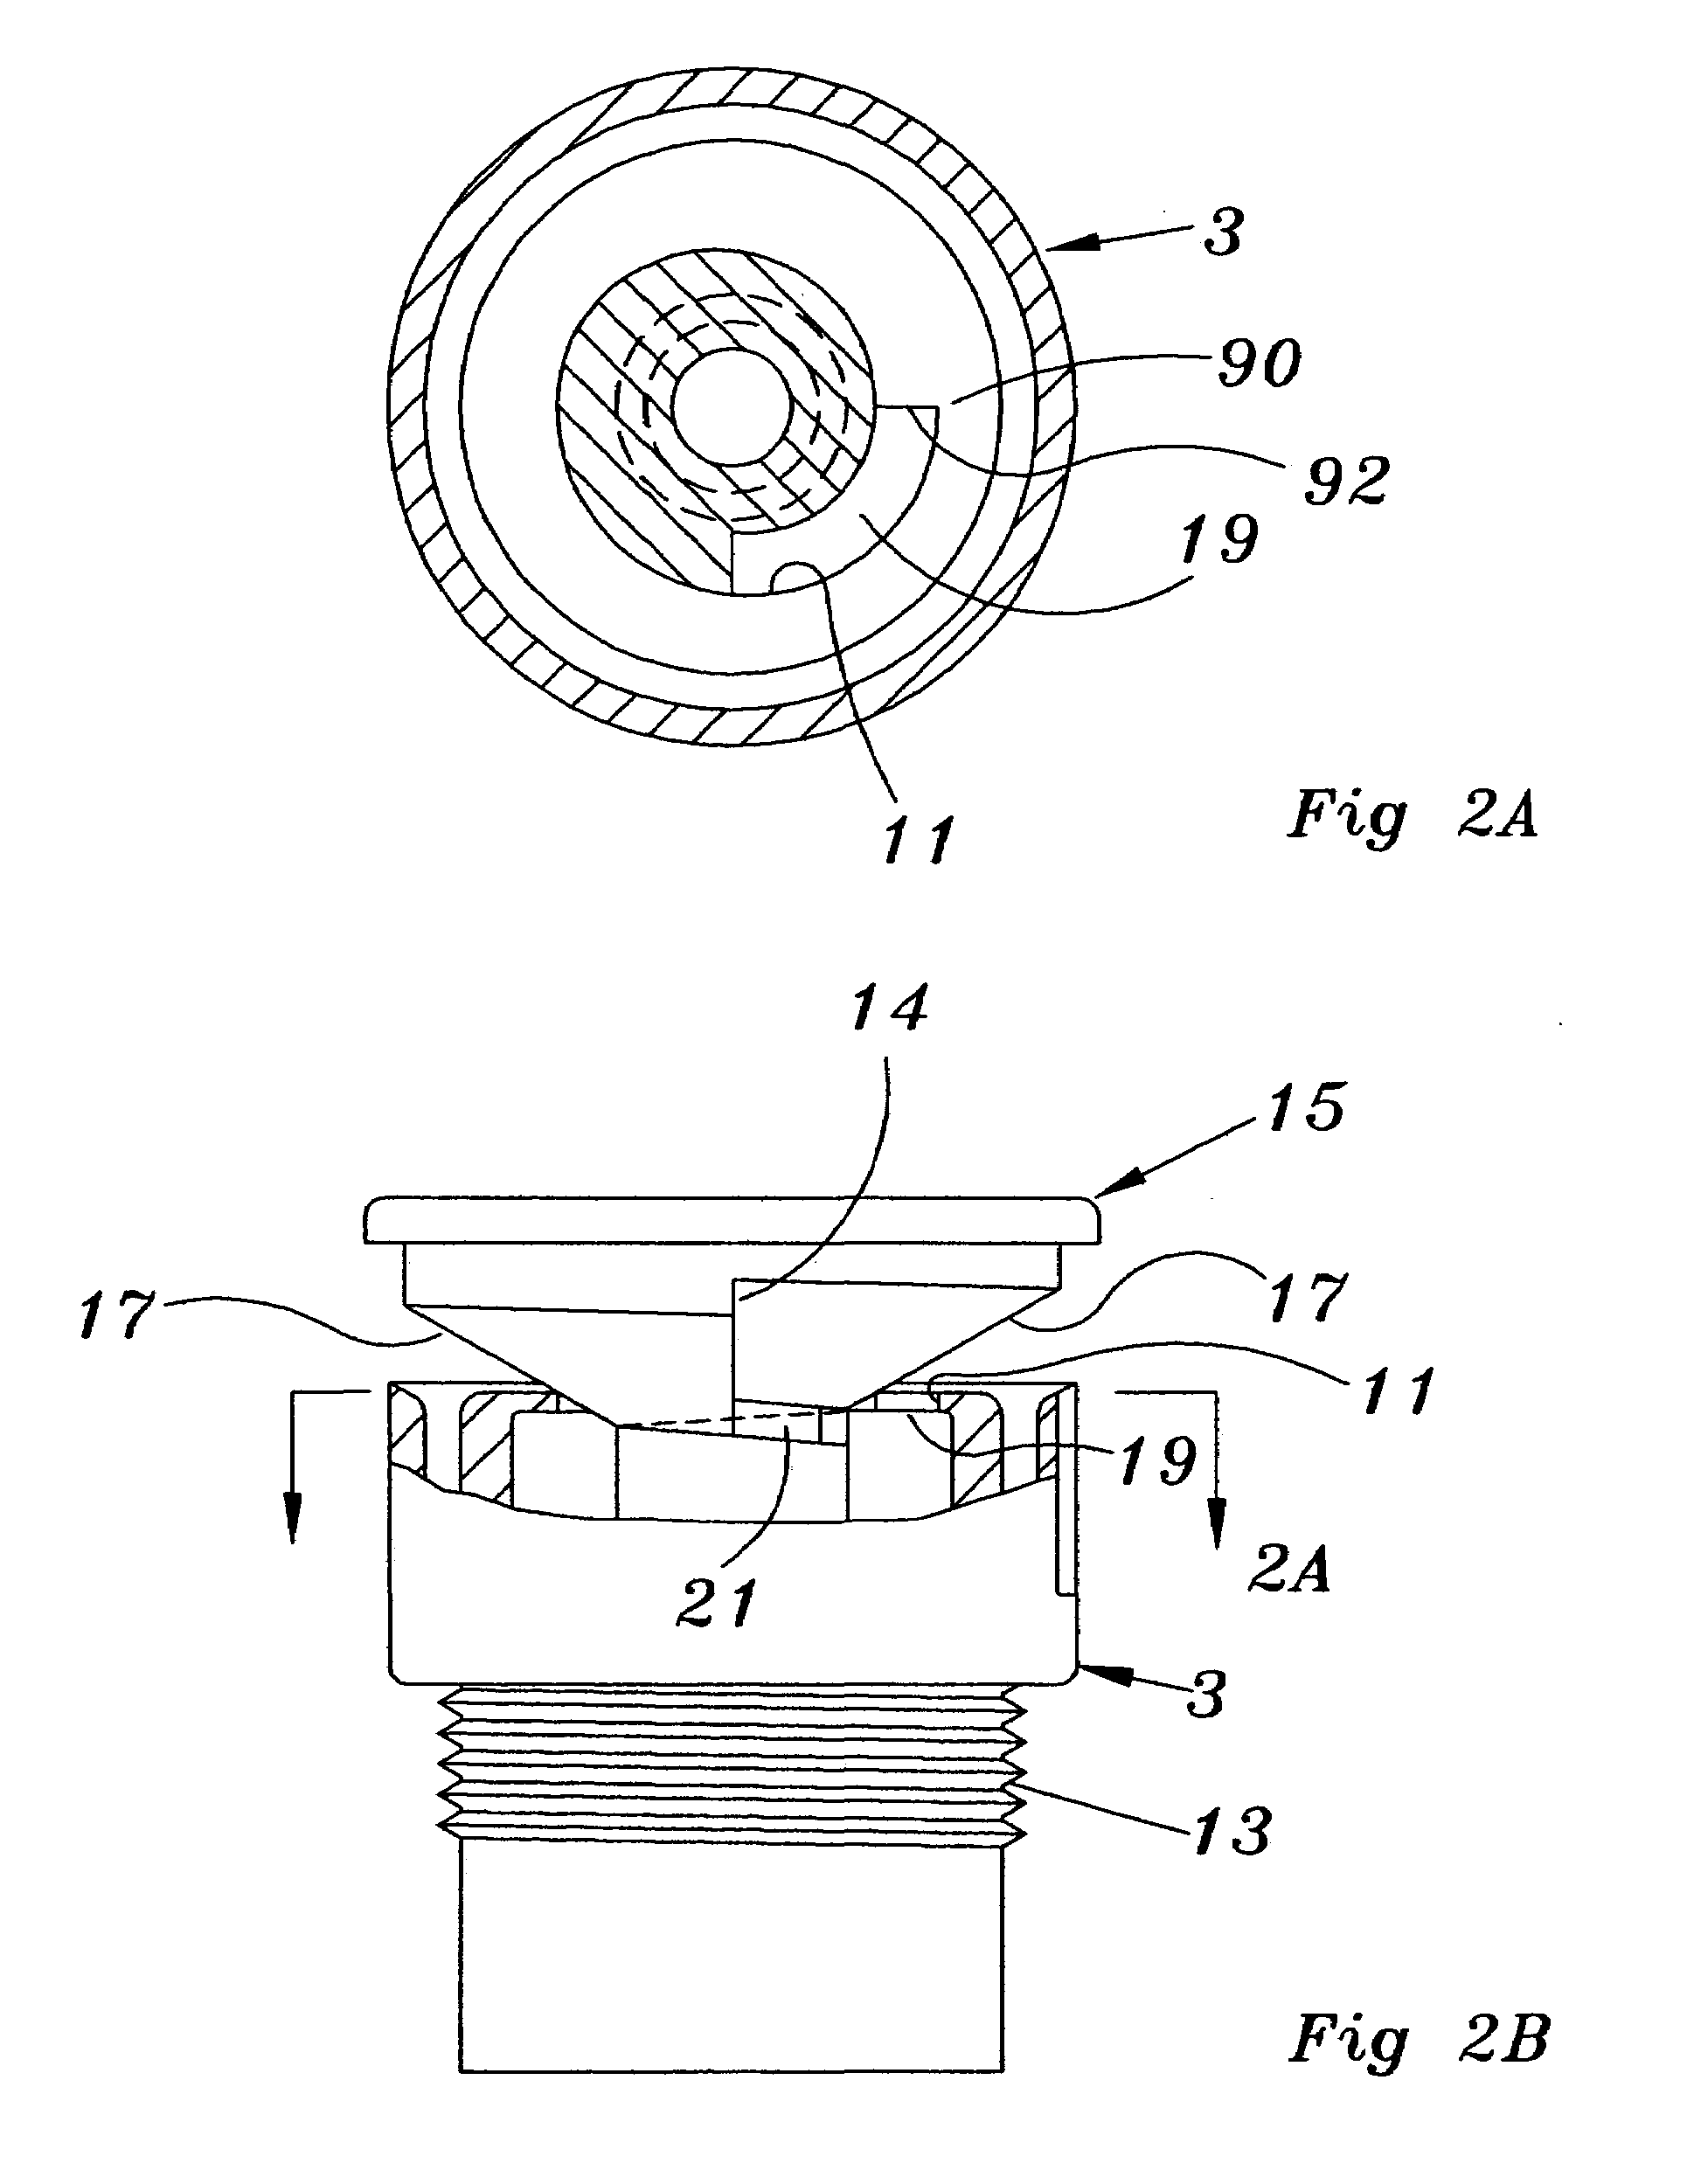 Spray nozzle with adjustable ARC spray elevation angle and flow